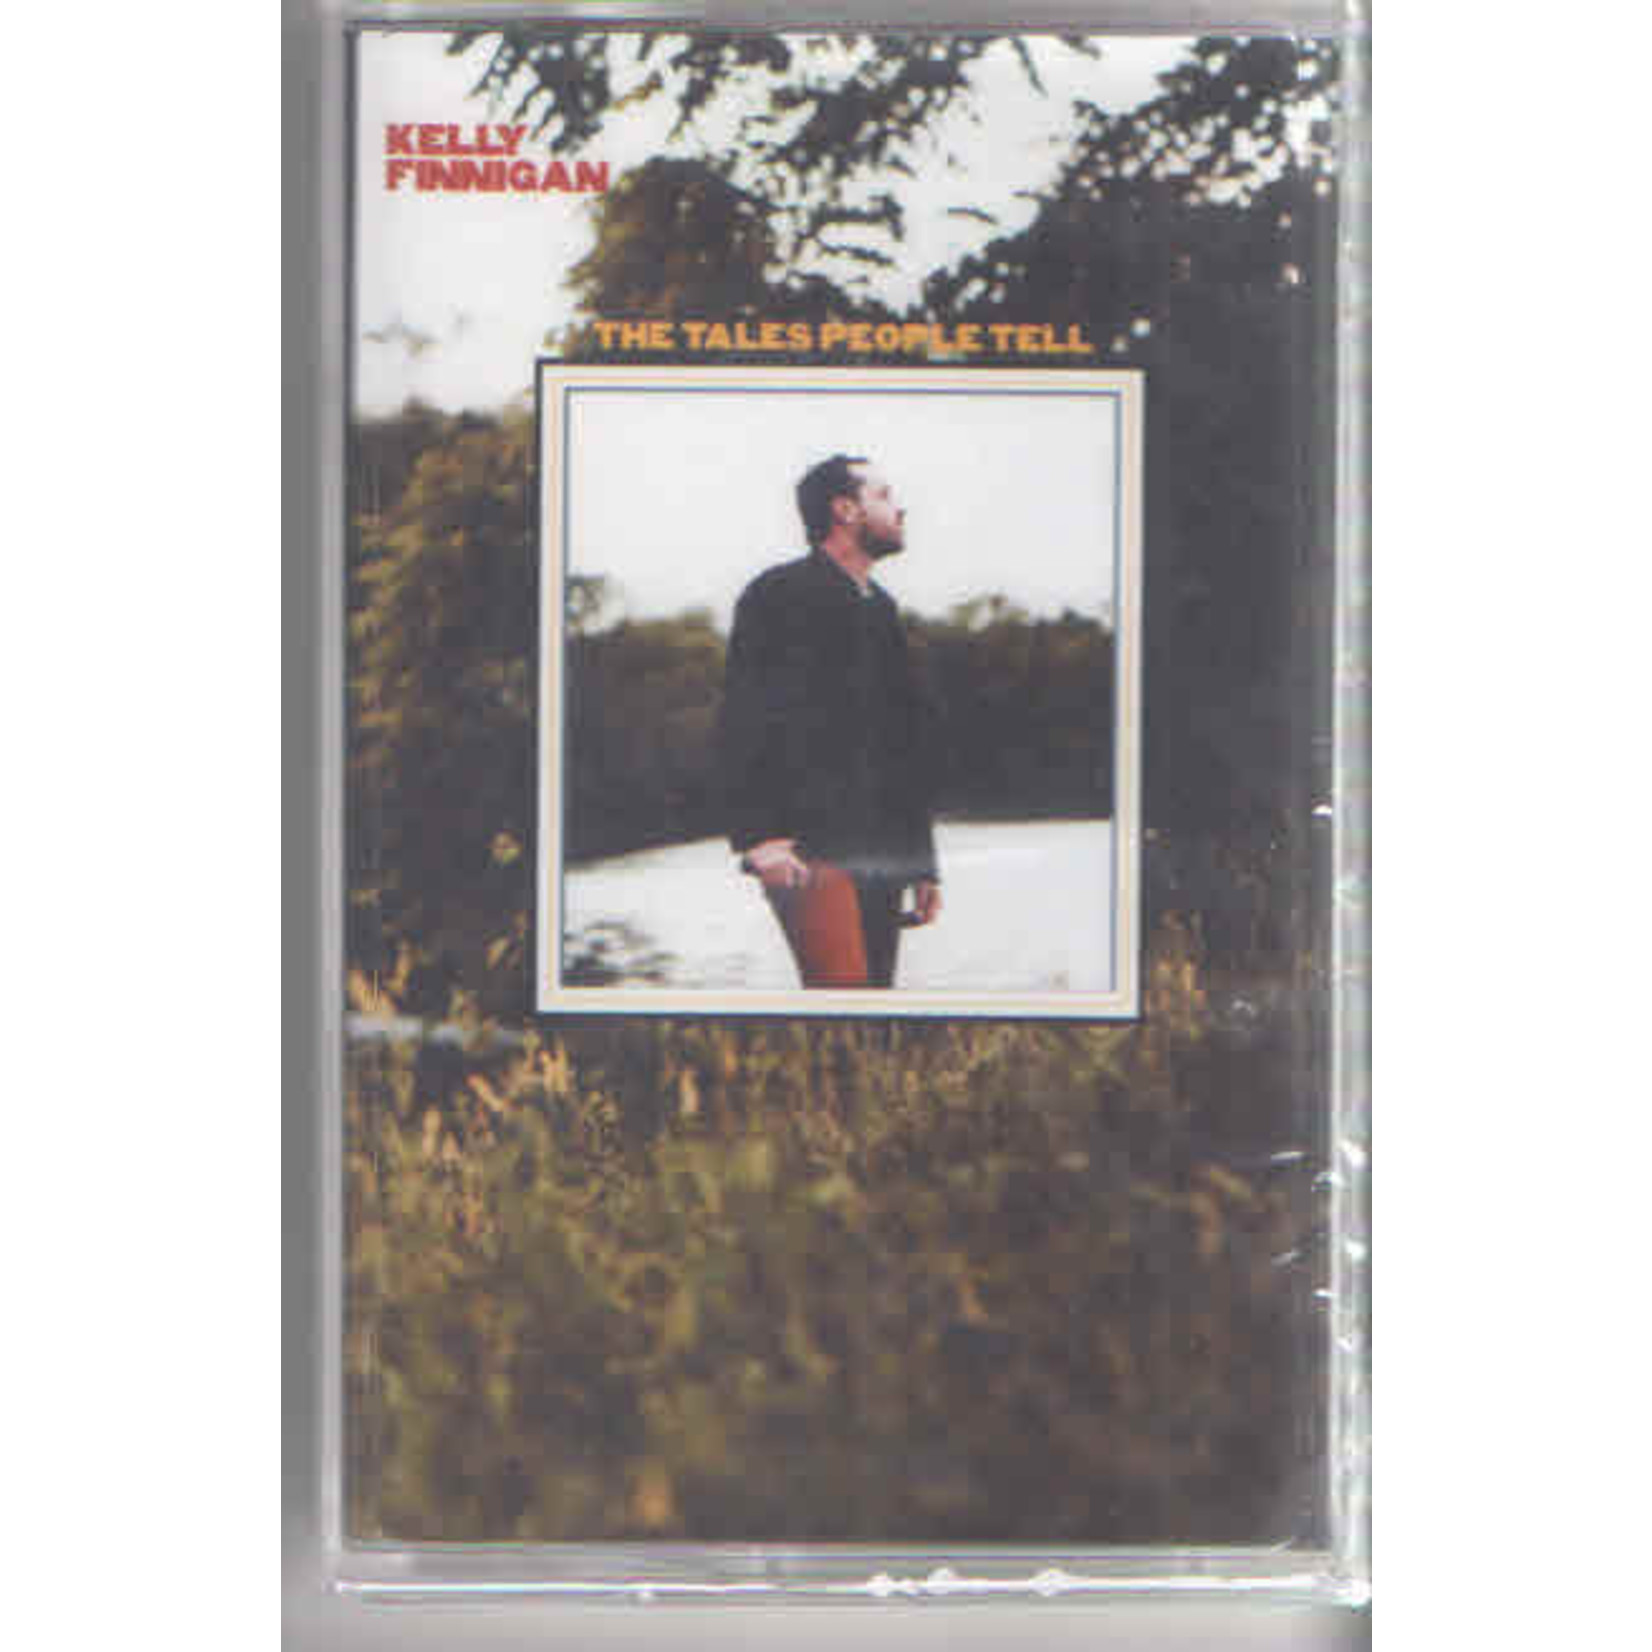 Colemine Kelly Finnigan - The Tales People Tell (Tape) [Red]